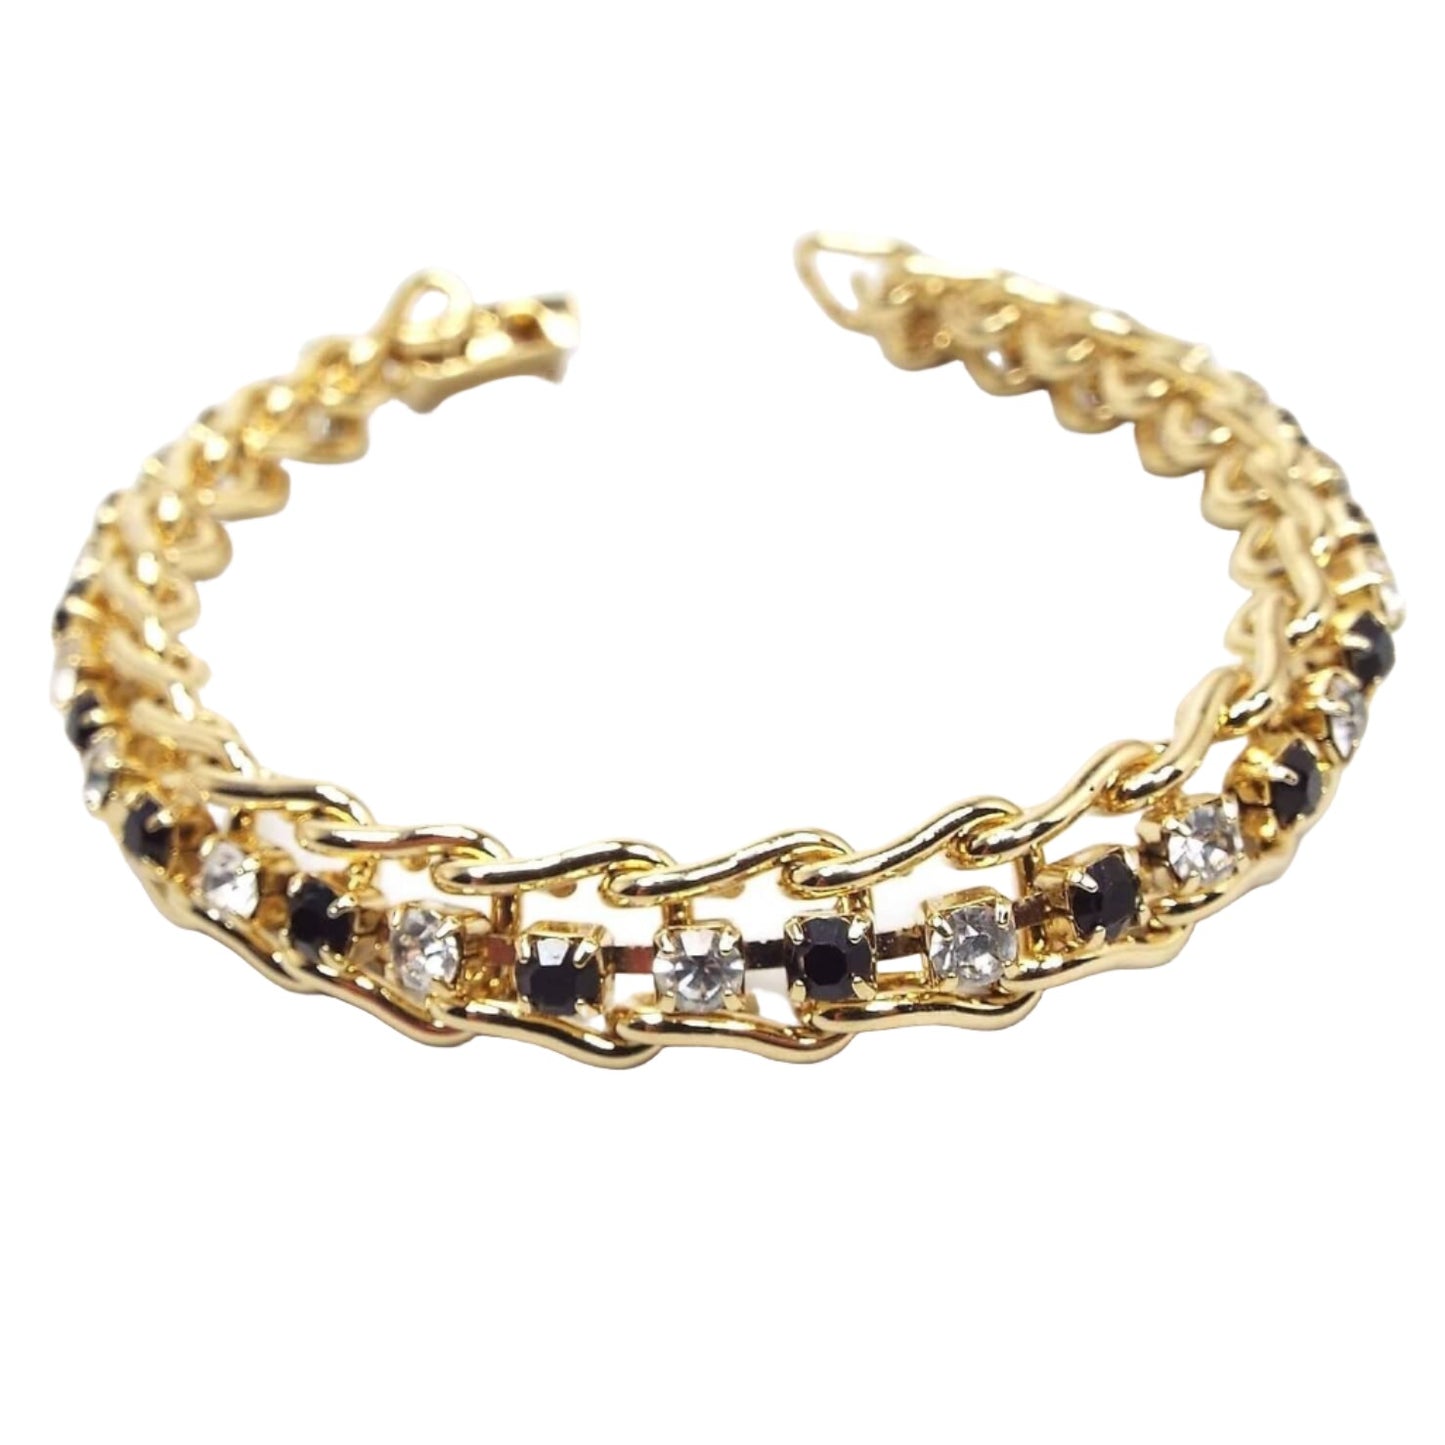 Front view of the retro vintage rhinestone bracelet. The metal is shiny gold tone in color and has sideways curved U shaped links. Inside each link is a small round rhinestone. The rhinestones alternate in color down the length of the bracelet in black and sparkling clear. There is a snap lock clasp at the end.